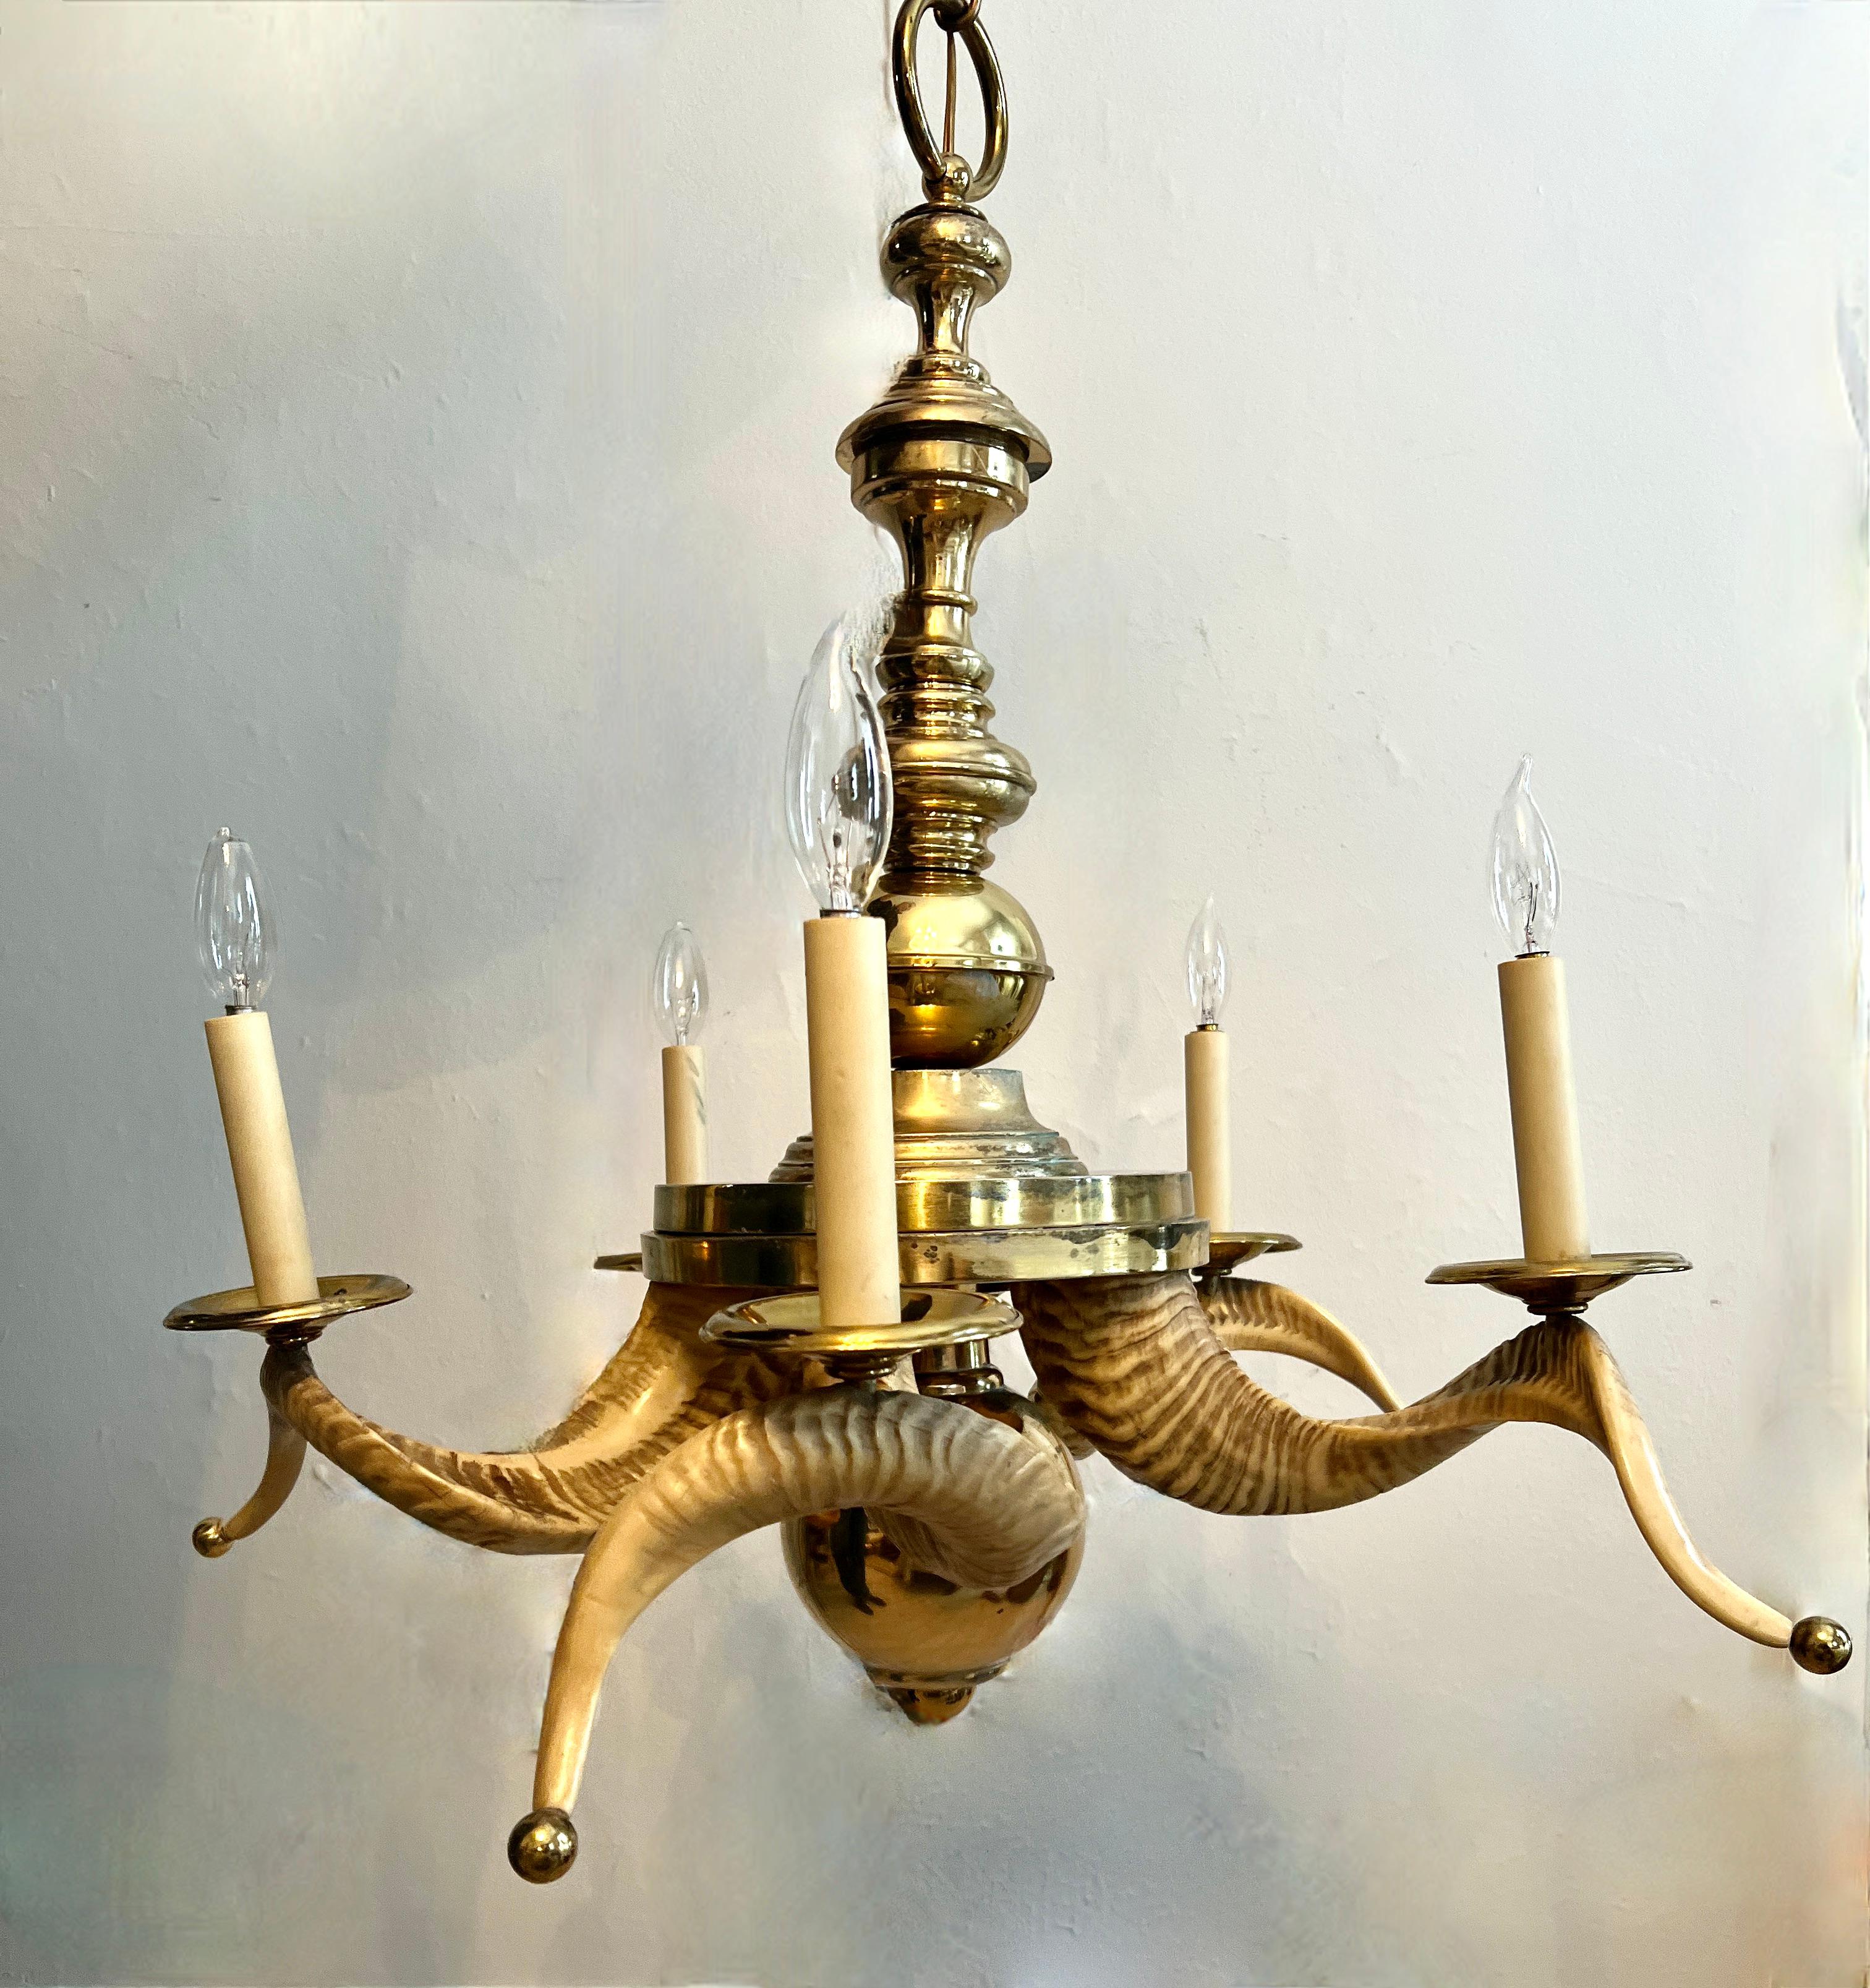 A Chapman Brass and Rams Horn Chandelier with 5 Lights.  This Mid Century piece is a wonderful Organic material mixed with fine brass accents.  

The Brass details of varying sizes, as the bottom weighted sphere and the brass ball tips at the tip of